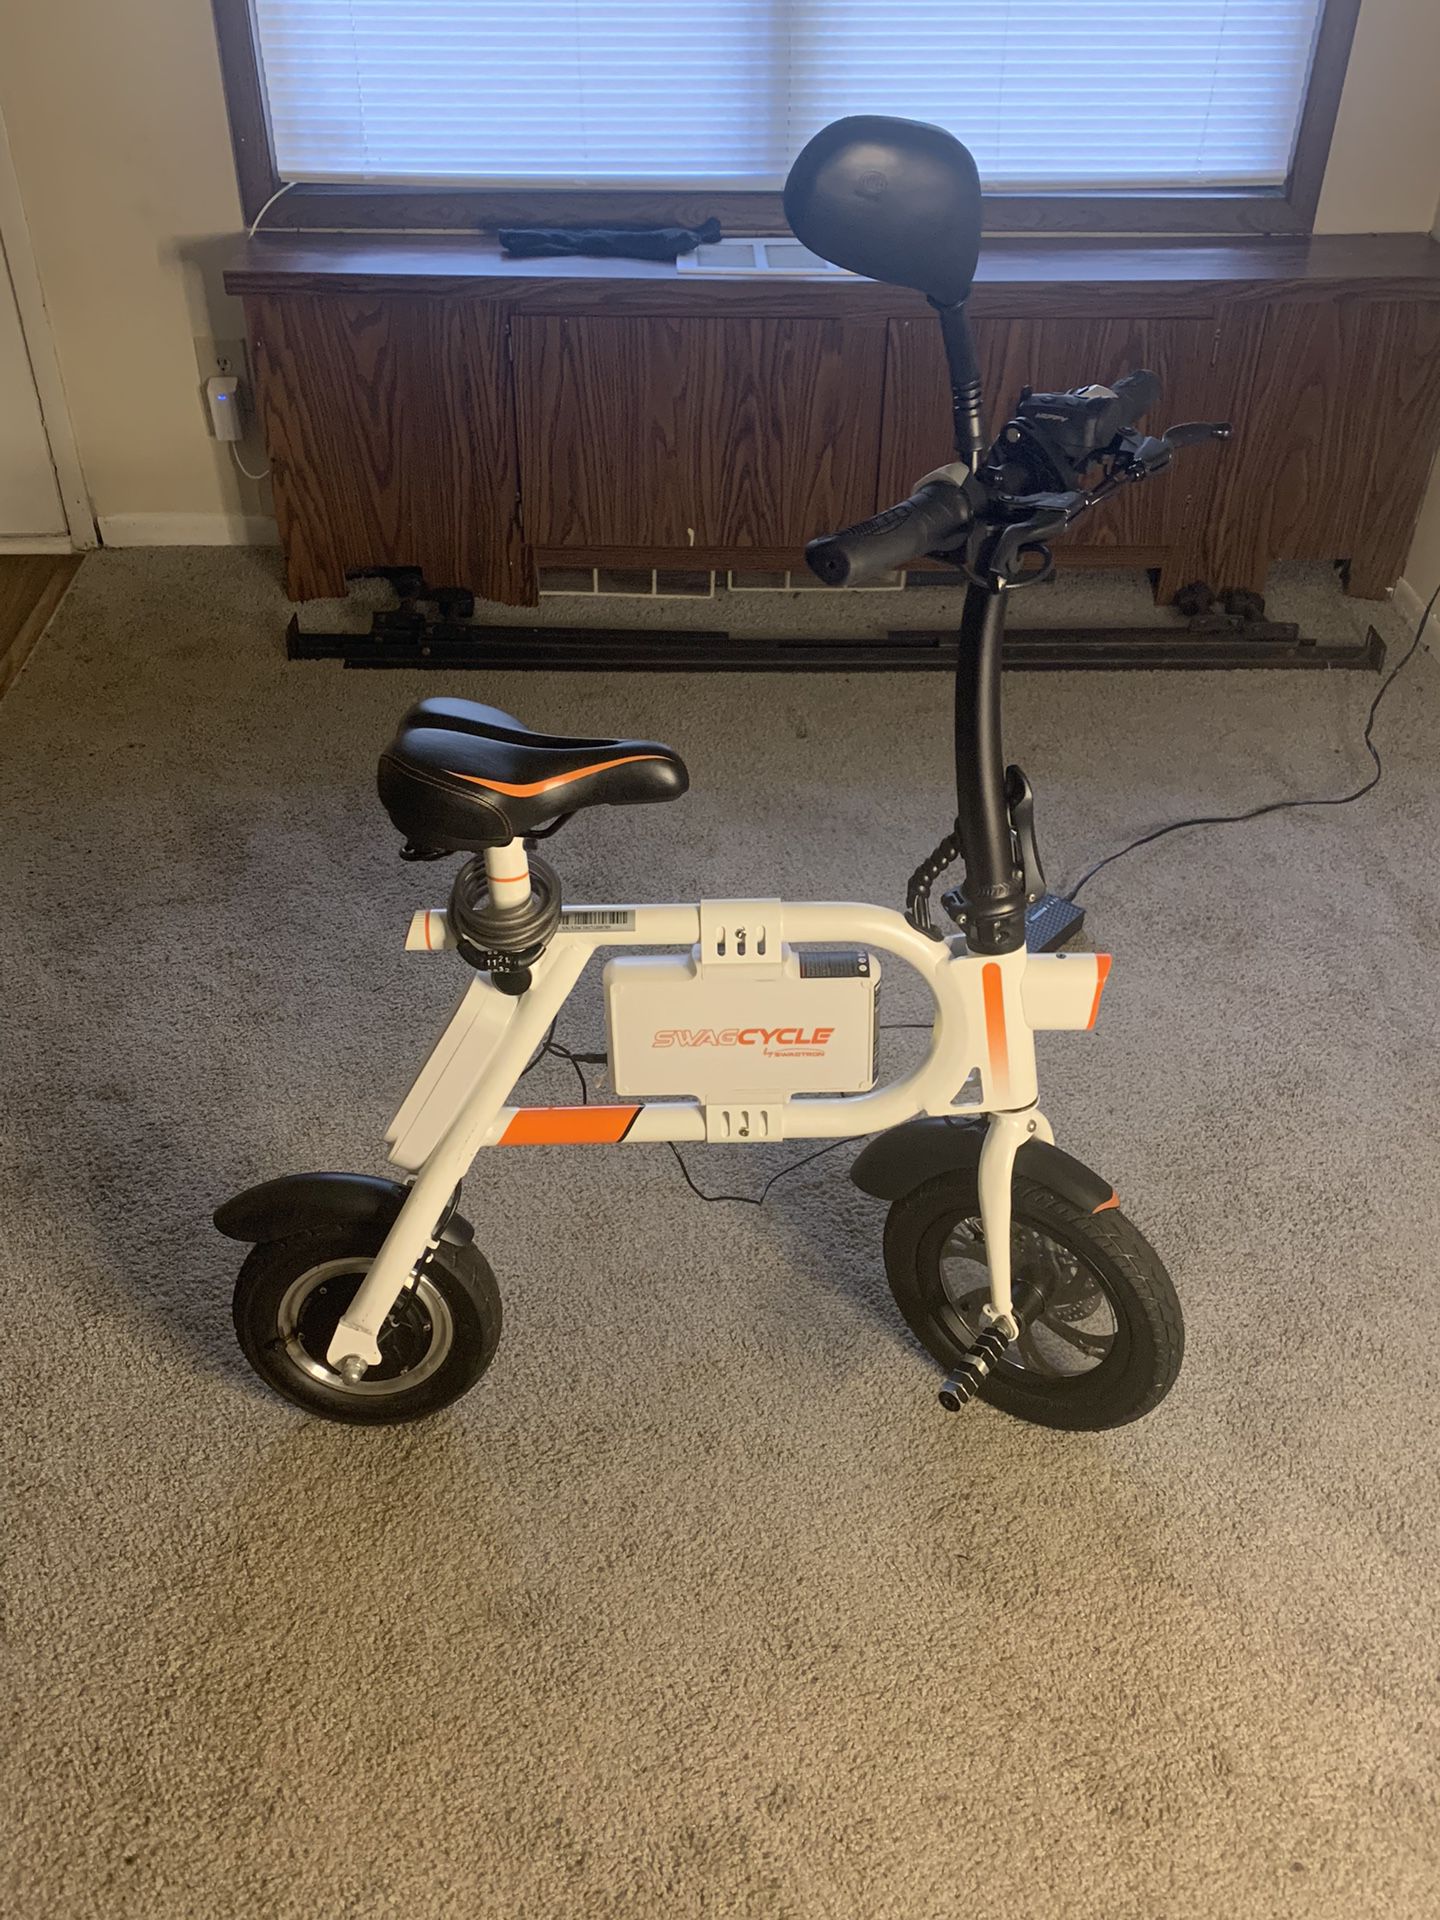 SwagCycle Scooter 